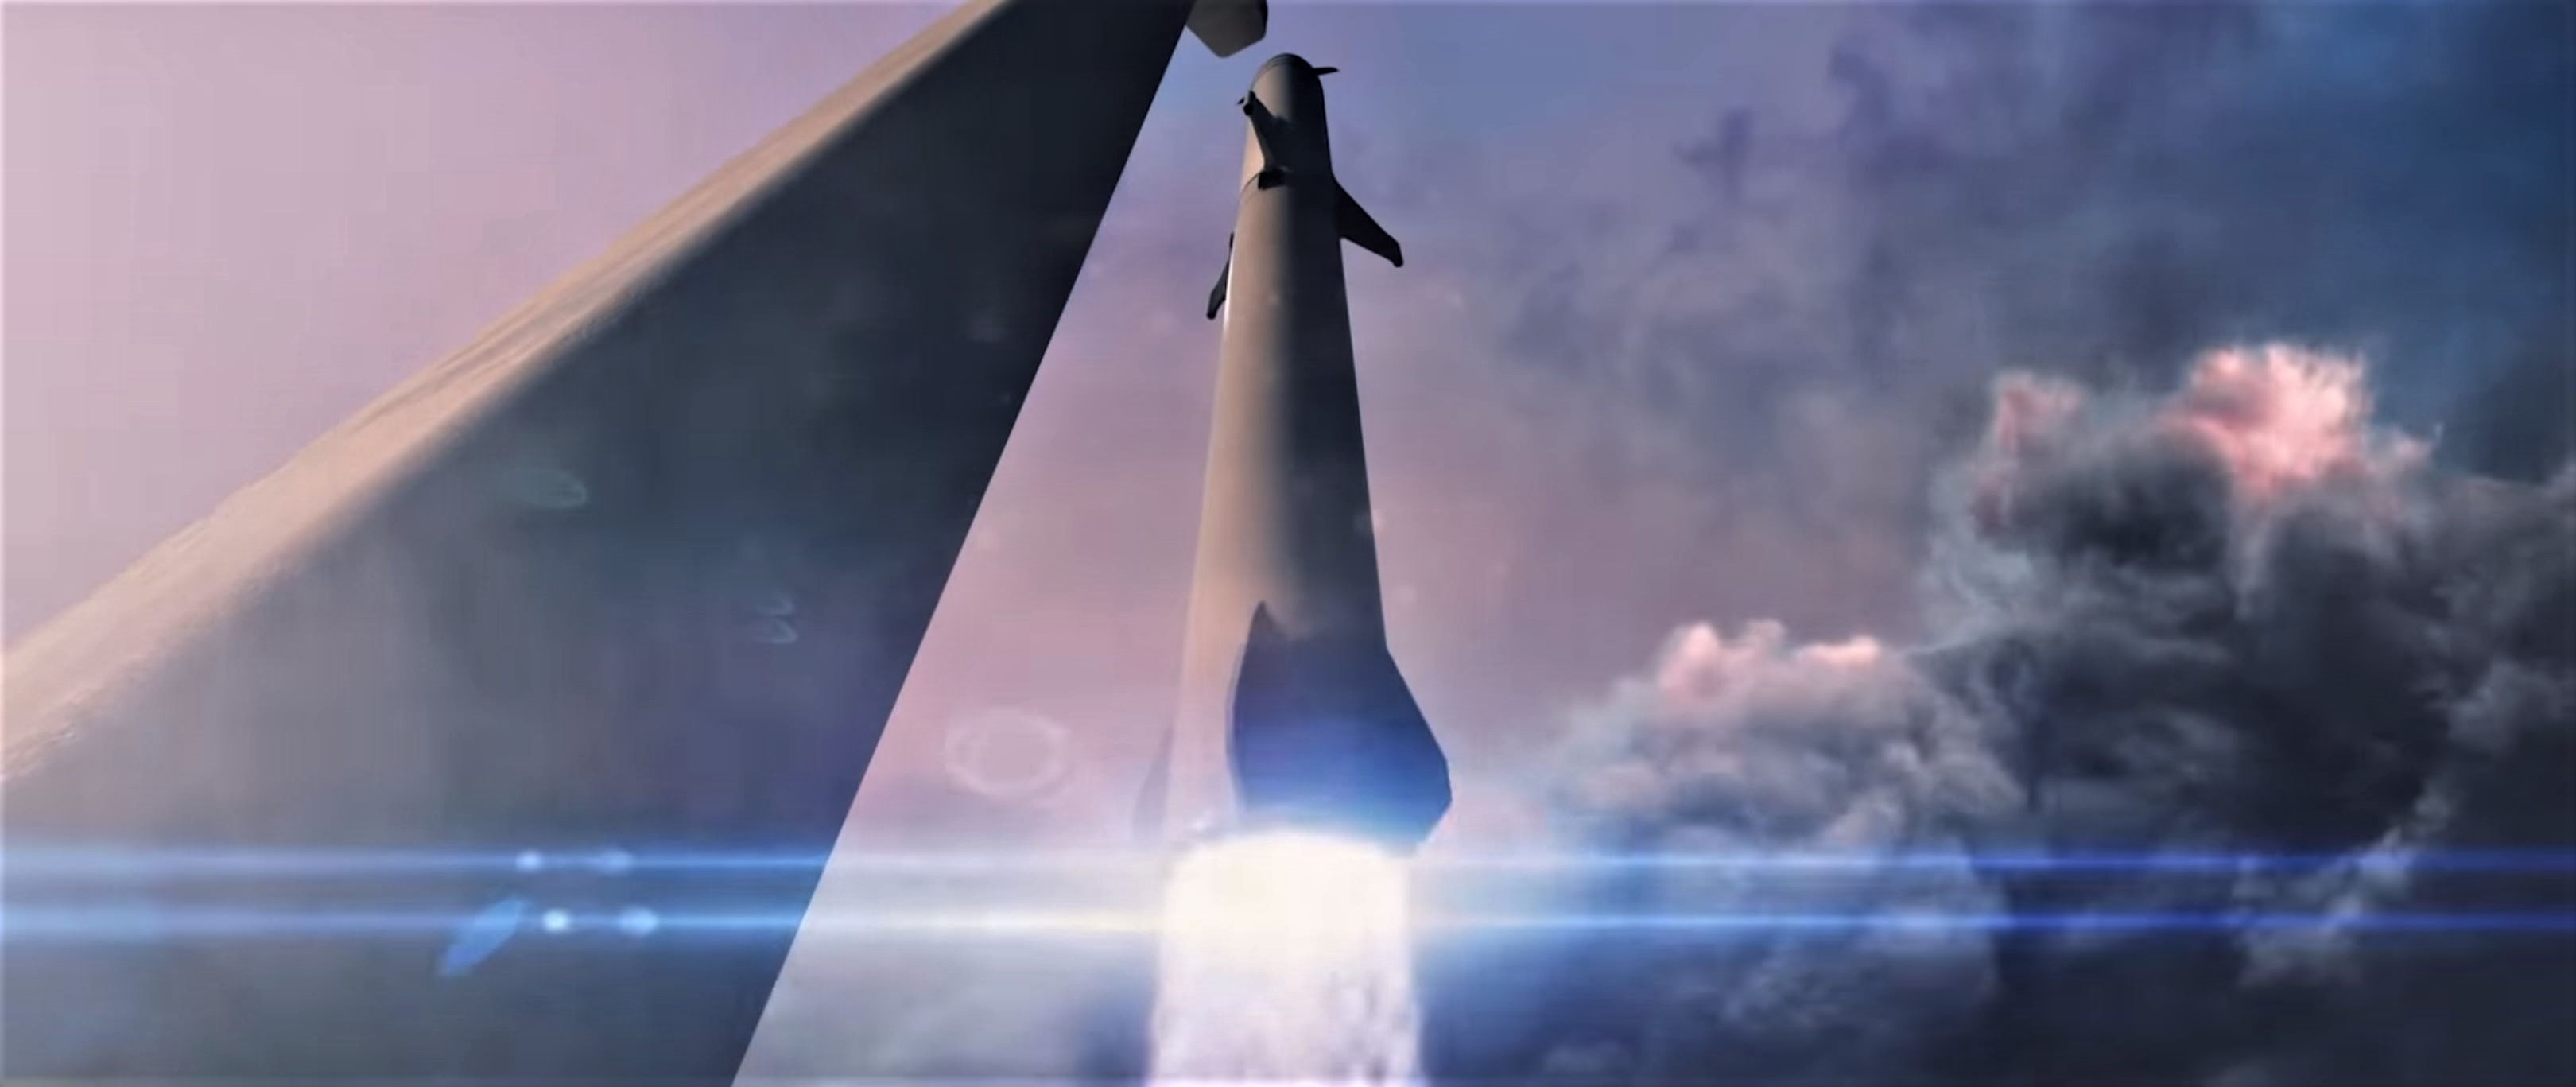 BFR 2018 launch render (SpaceX) 3